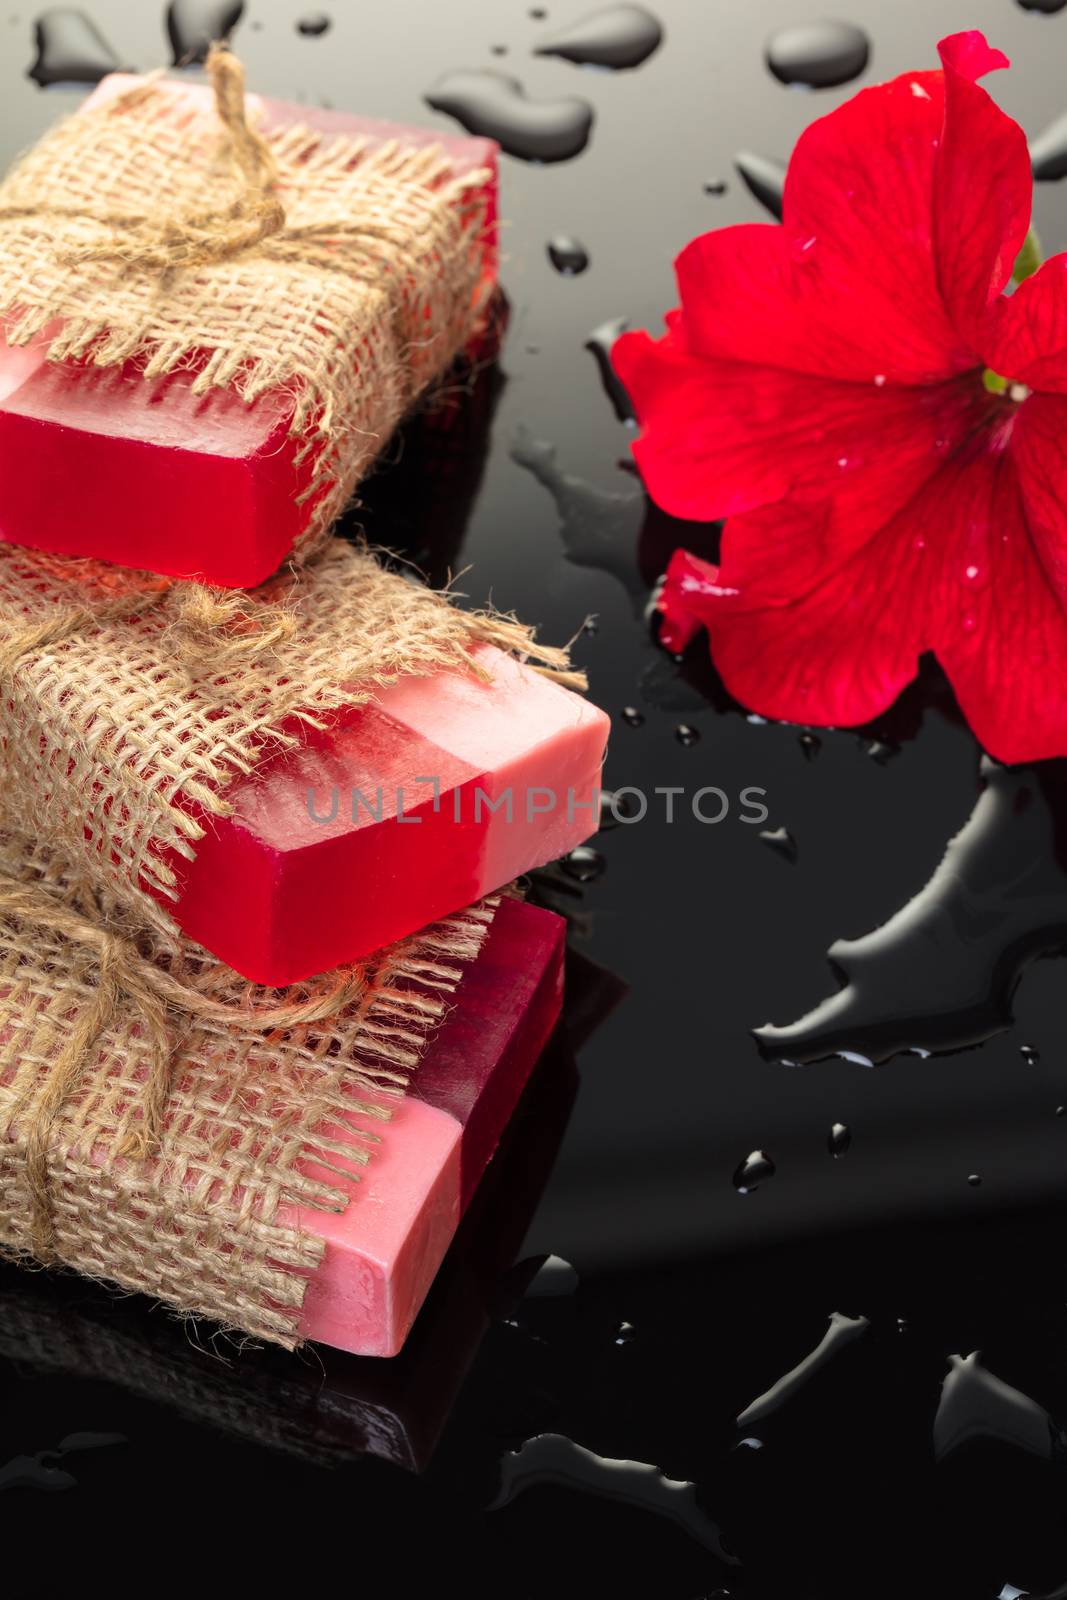 Handmade soap red with a flower petunia  by MegaArt